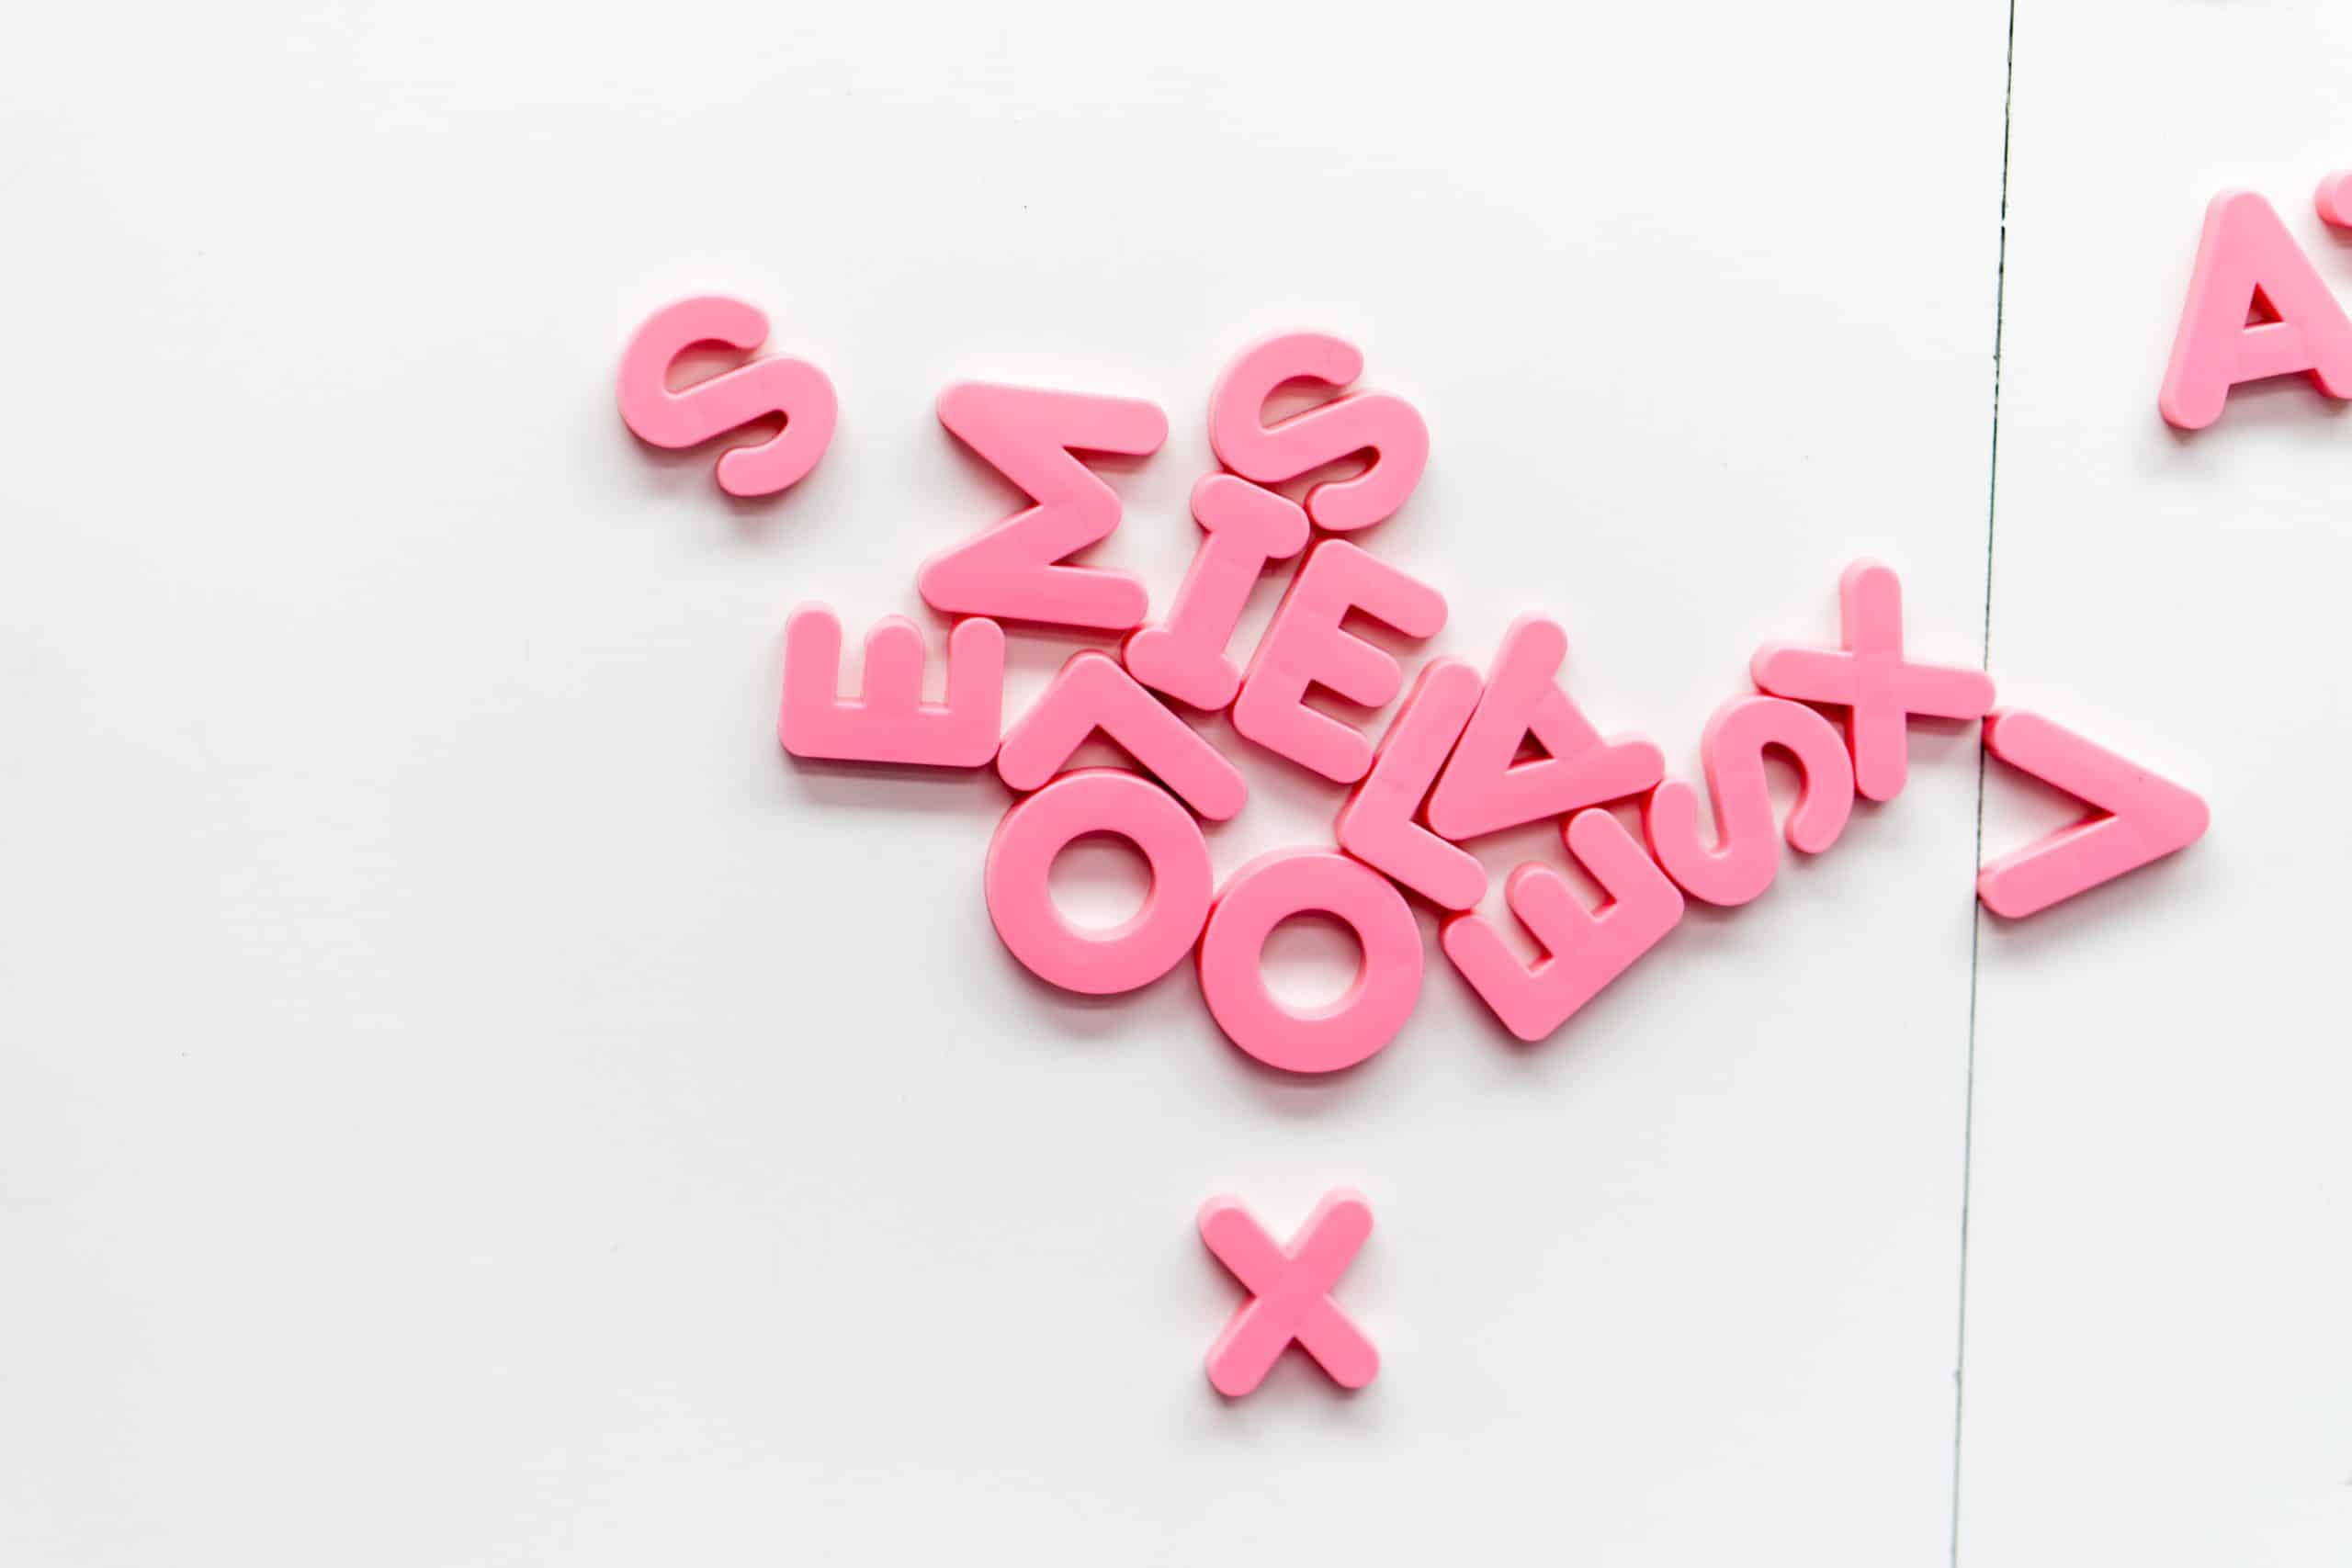 a pile of pink letters on a white background